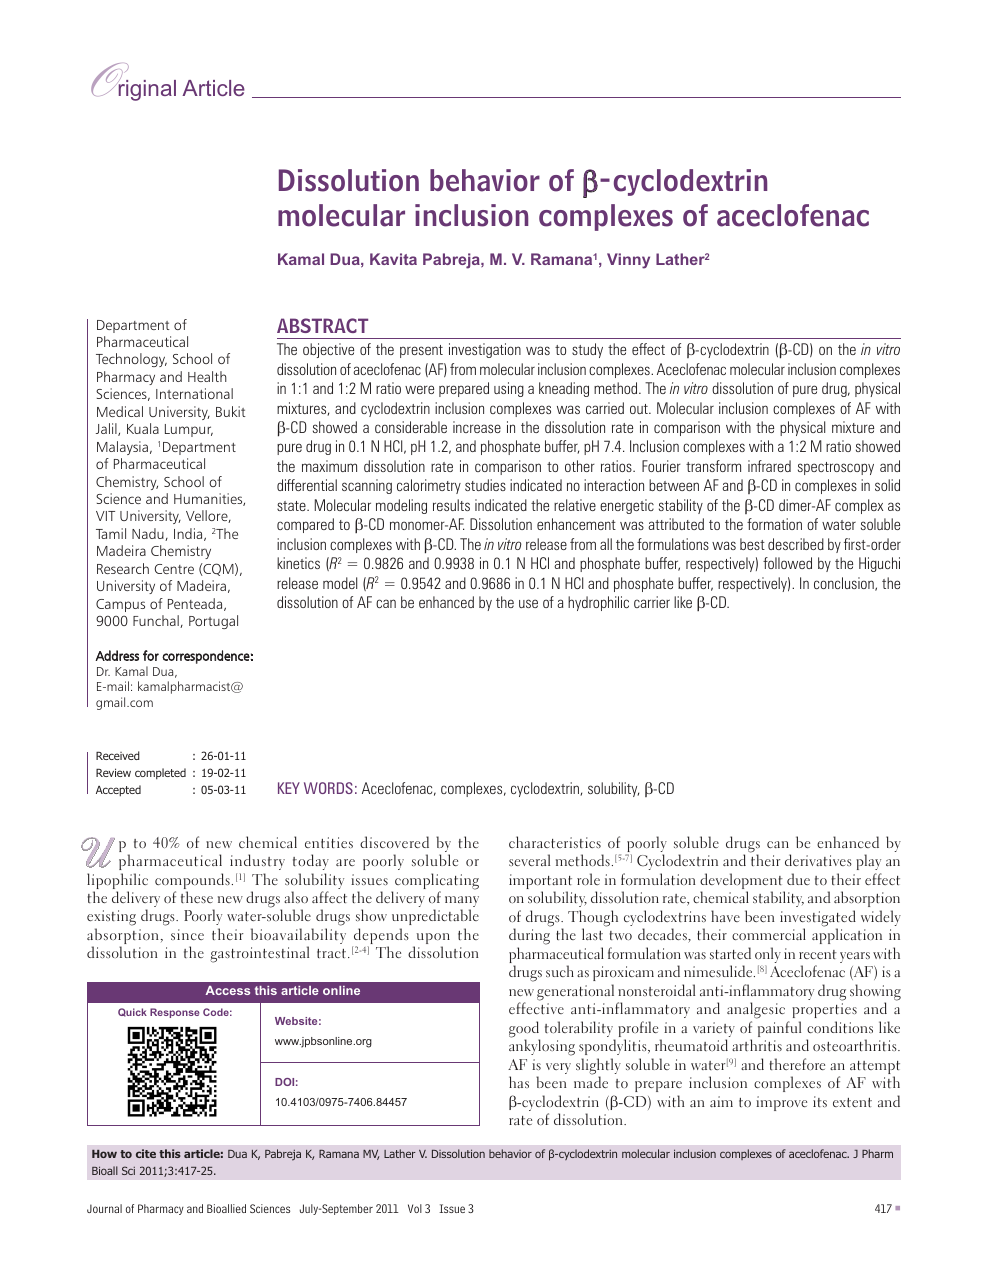 Dissolution Behavior Of B Cyclodextrin Molecular Inclusion Complexes Of Aceclofenac Topic Of Research Paper In Nano Technology Download Scholarly Article Pdf And Read For Free On Cyberleninka Open Science Hub